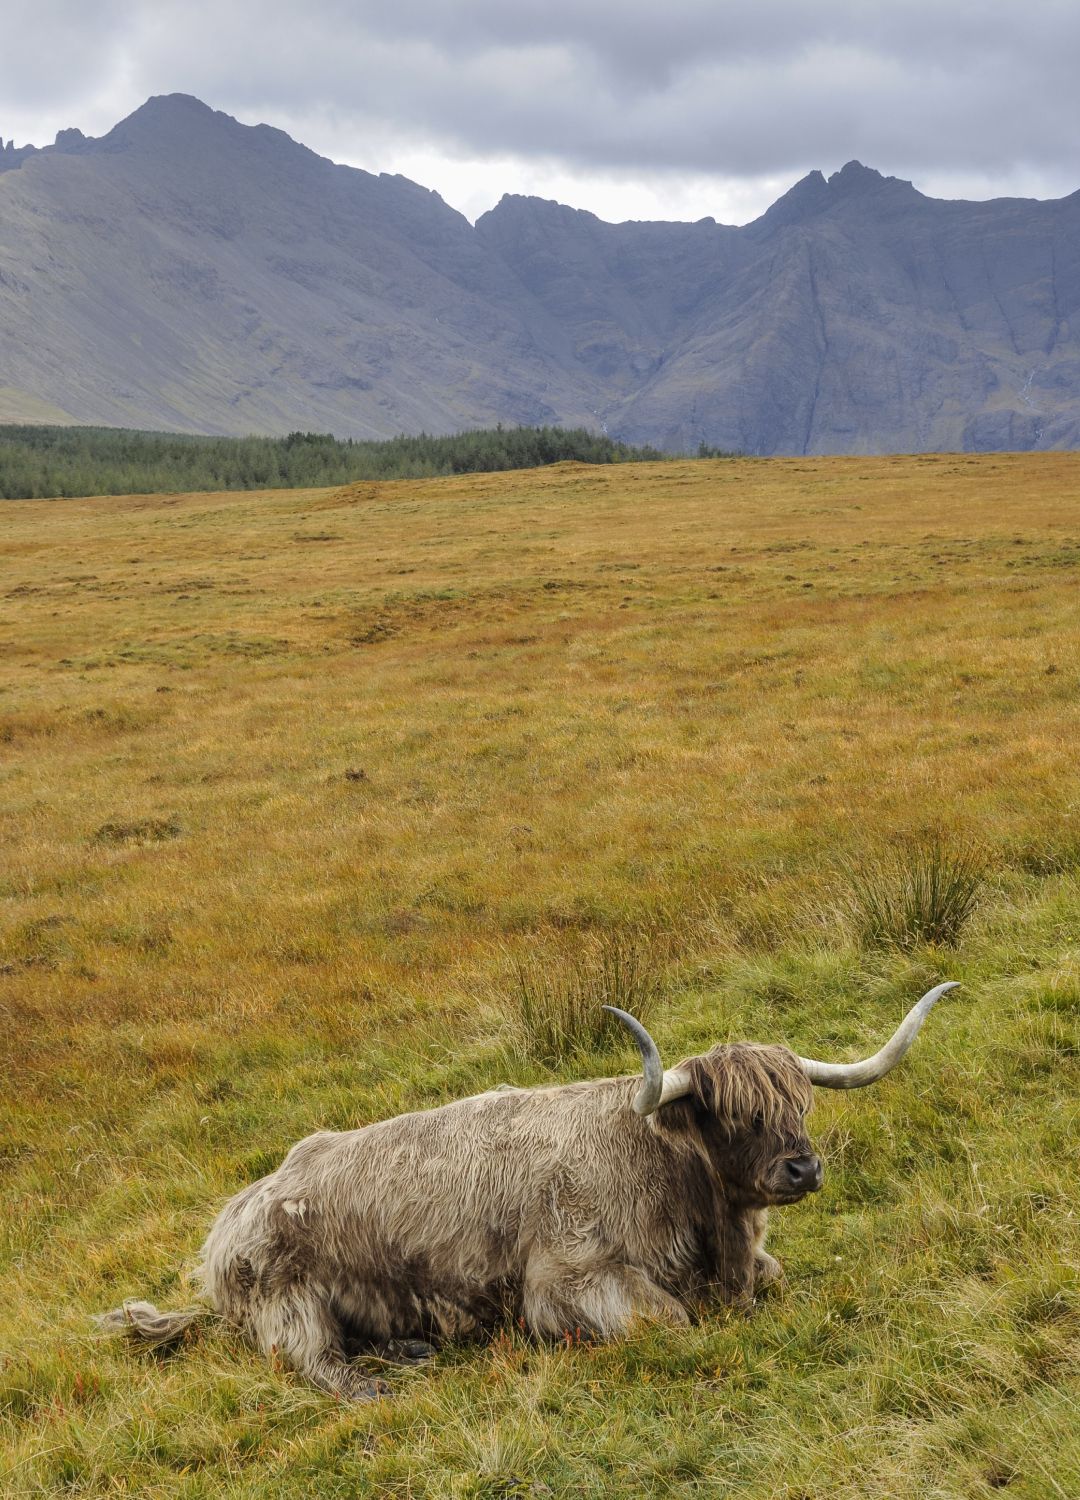 <p>                     While Scotland might not initially scream 'safari' to most, there are safari tours of the Highlands on offer to visitors, where you can embrace the country's wilderness. Safari Rangers navigate the terrain in Land Rovers to take visitors through the highest points of the Highlands, spotting owls, deer, eagles and Scottish wild cats along the way.                   </p>